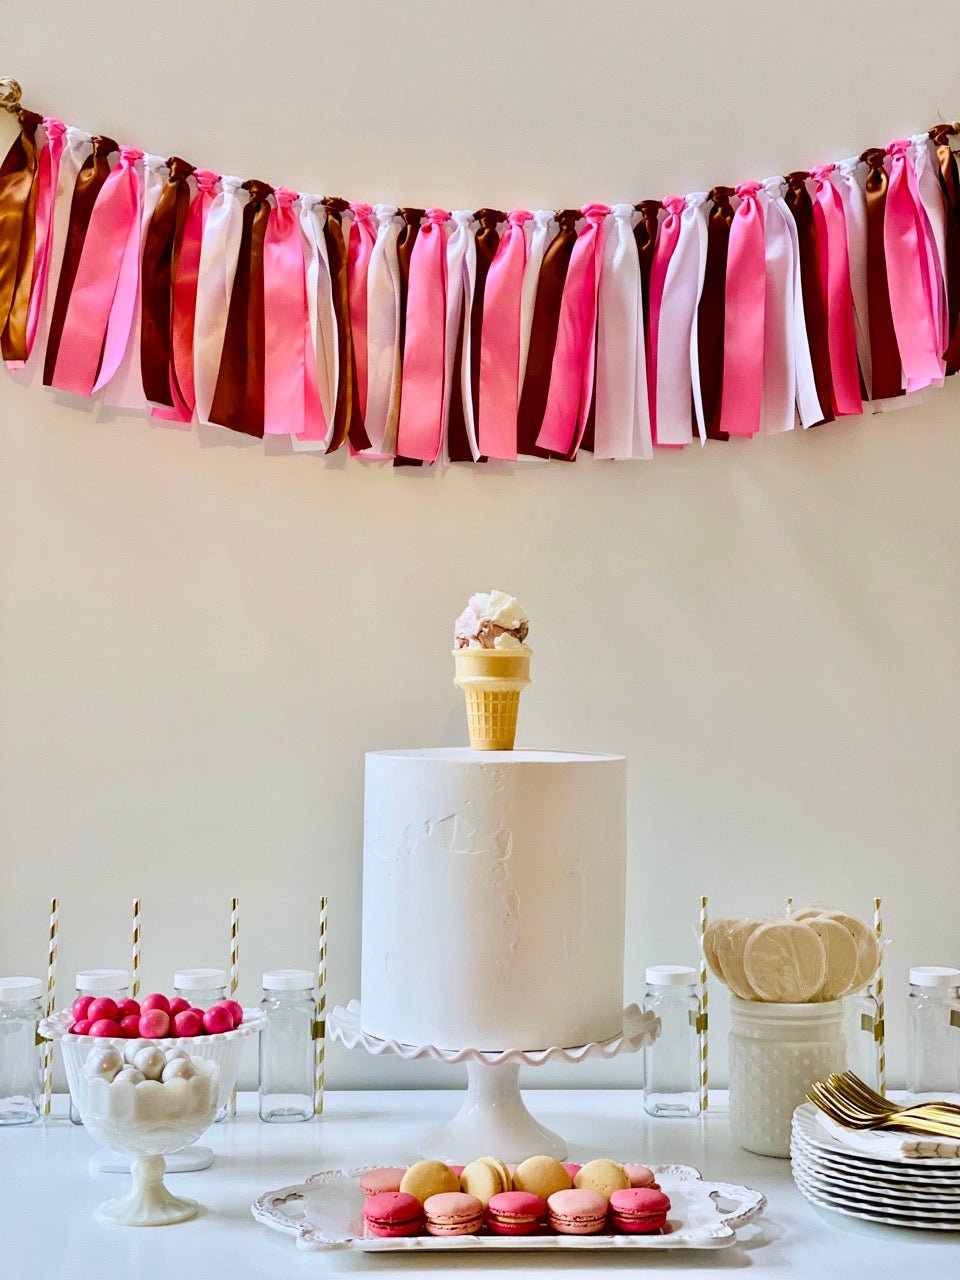 Ice Cream Ribbon Bunting - FREE Shipping - The Party Teacher